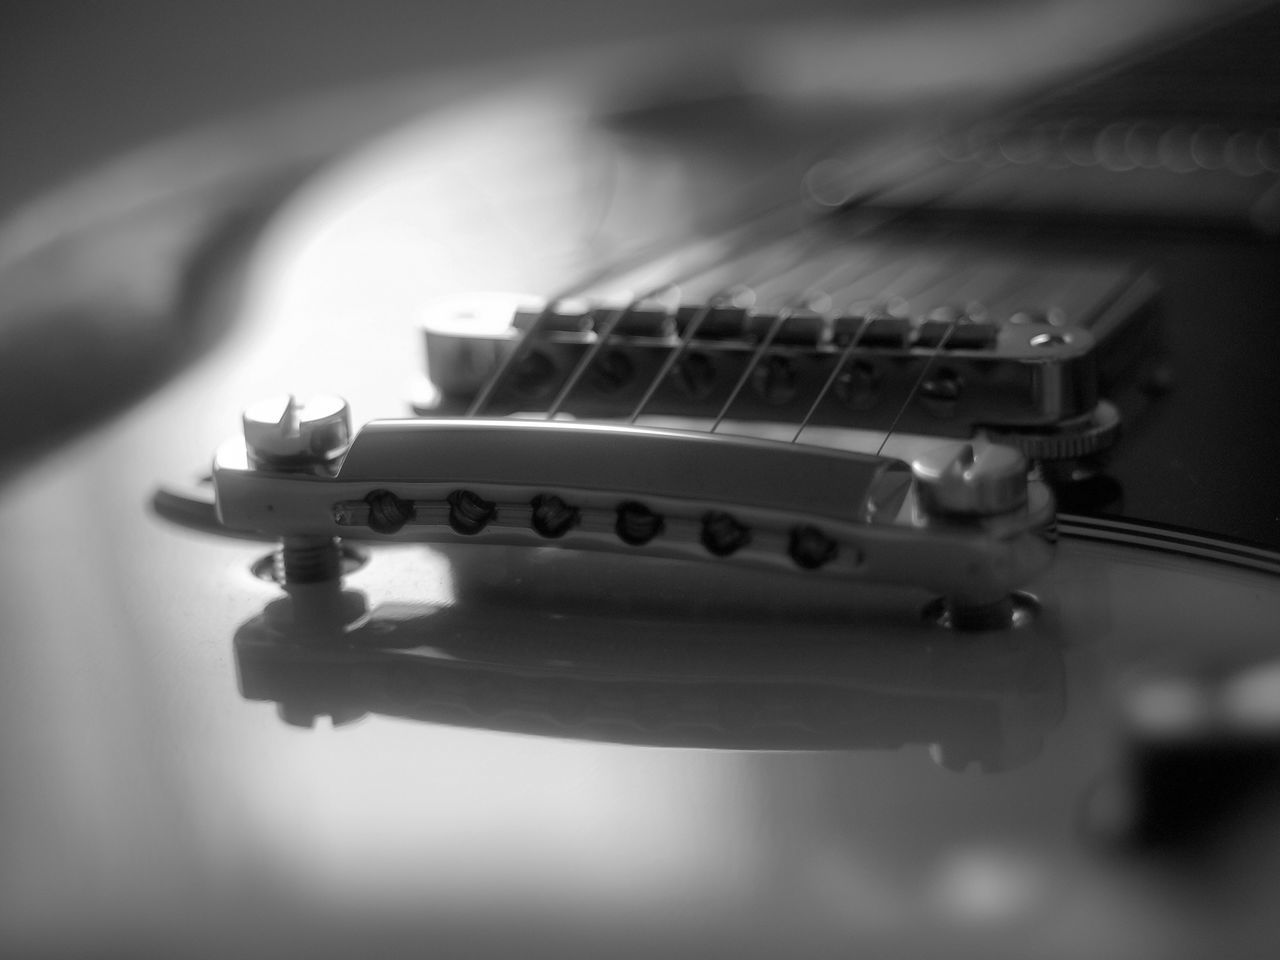 CLOSE-UP OF GUITAR ON TABLE AGAINST BLACK BACKGROUND